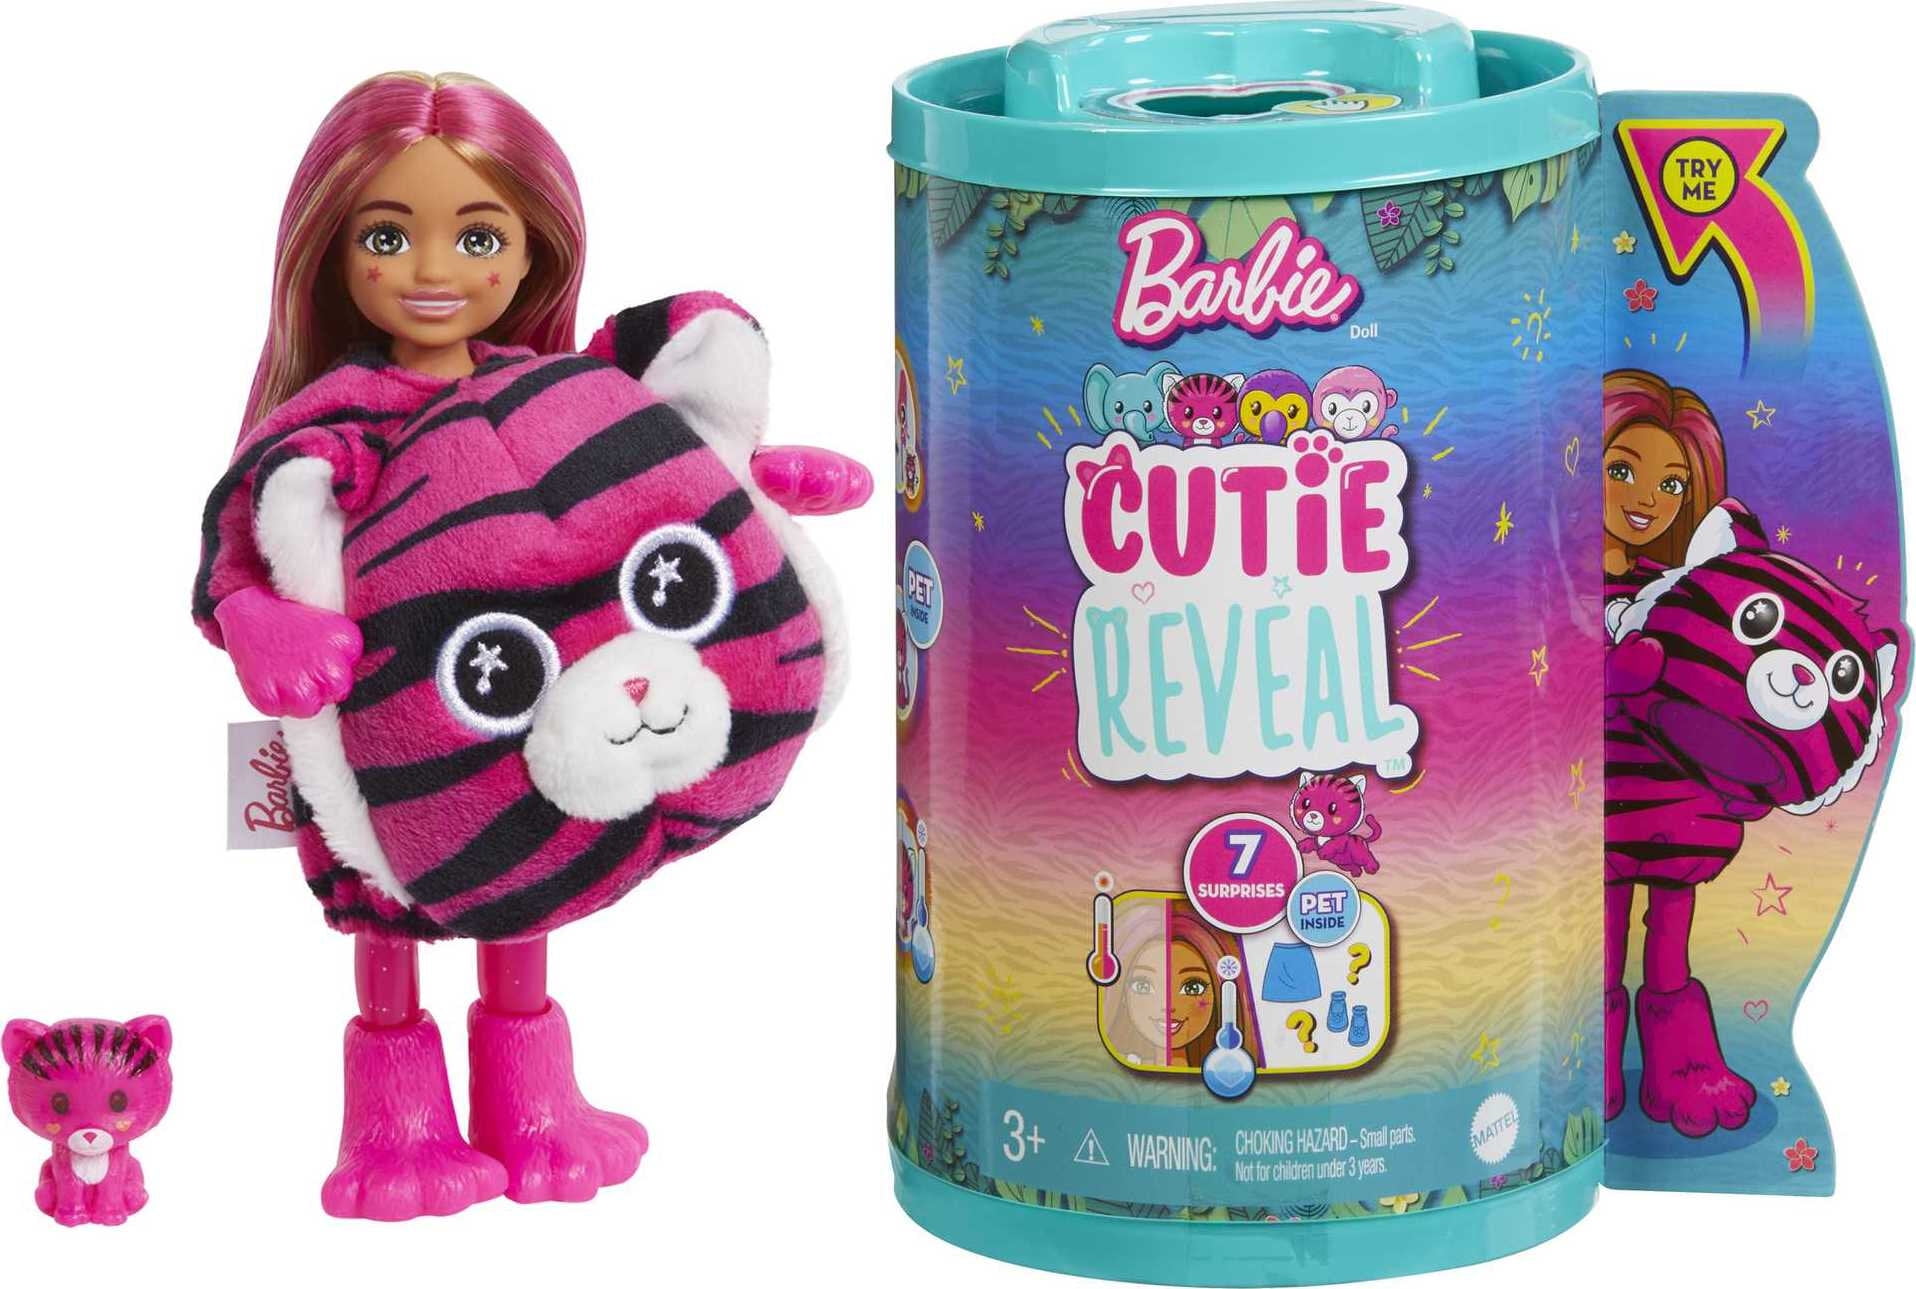 Barbie Cutie Reveal Chelsea Doll and Accessories, Jungle Series,  Tiger-Themed Small Doll Set 